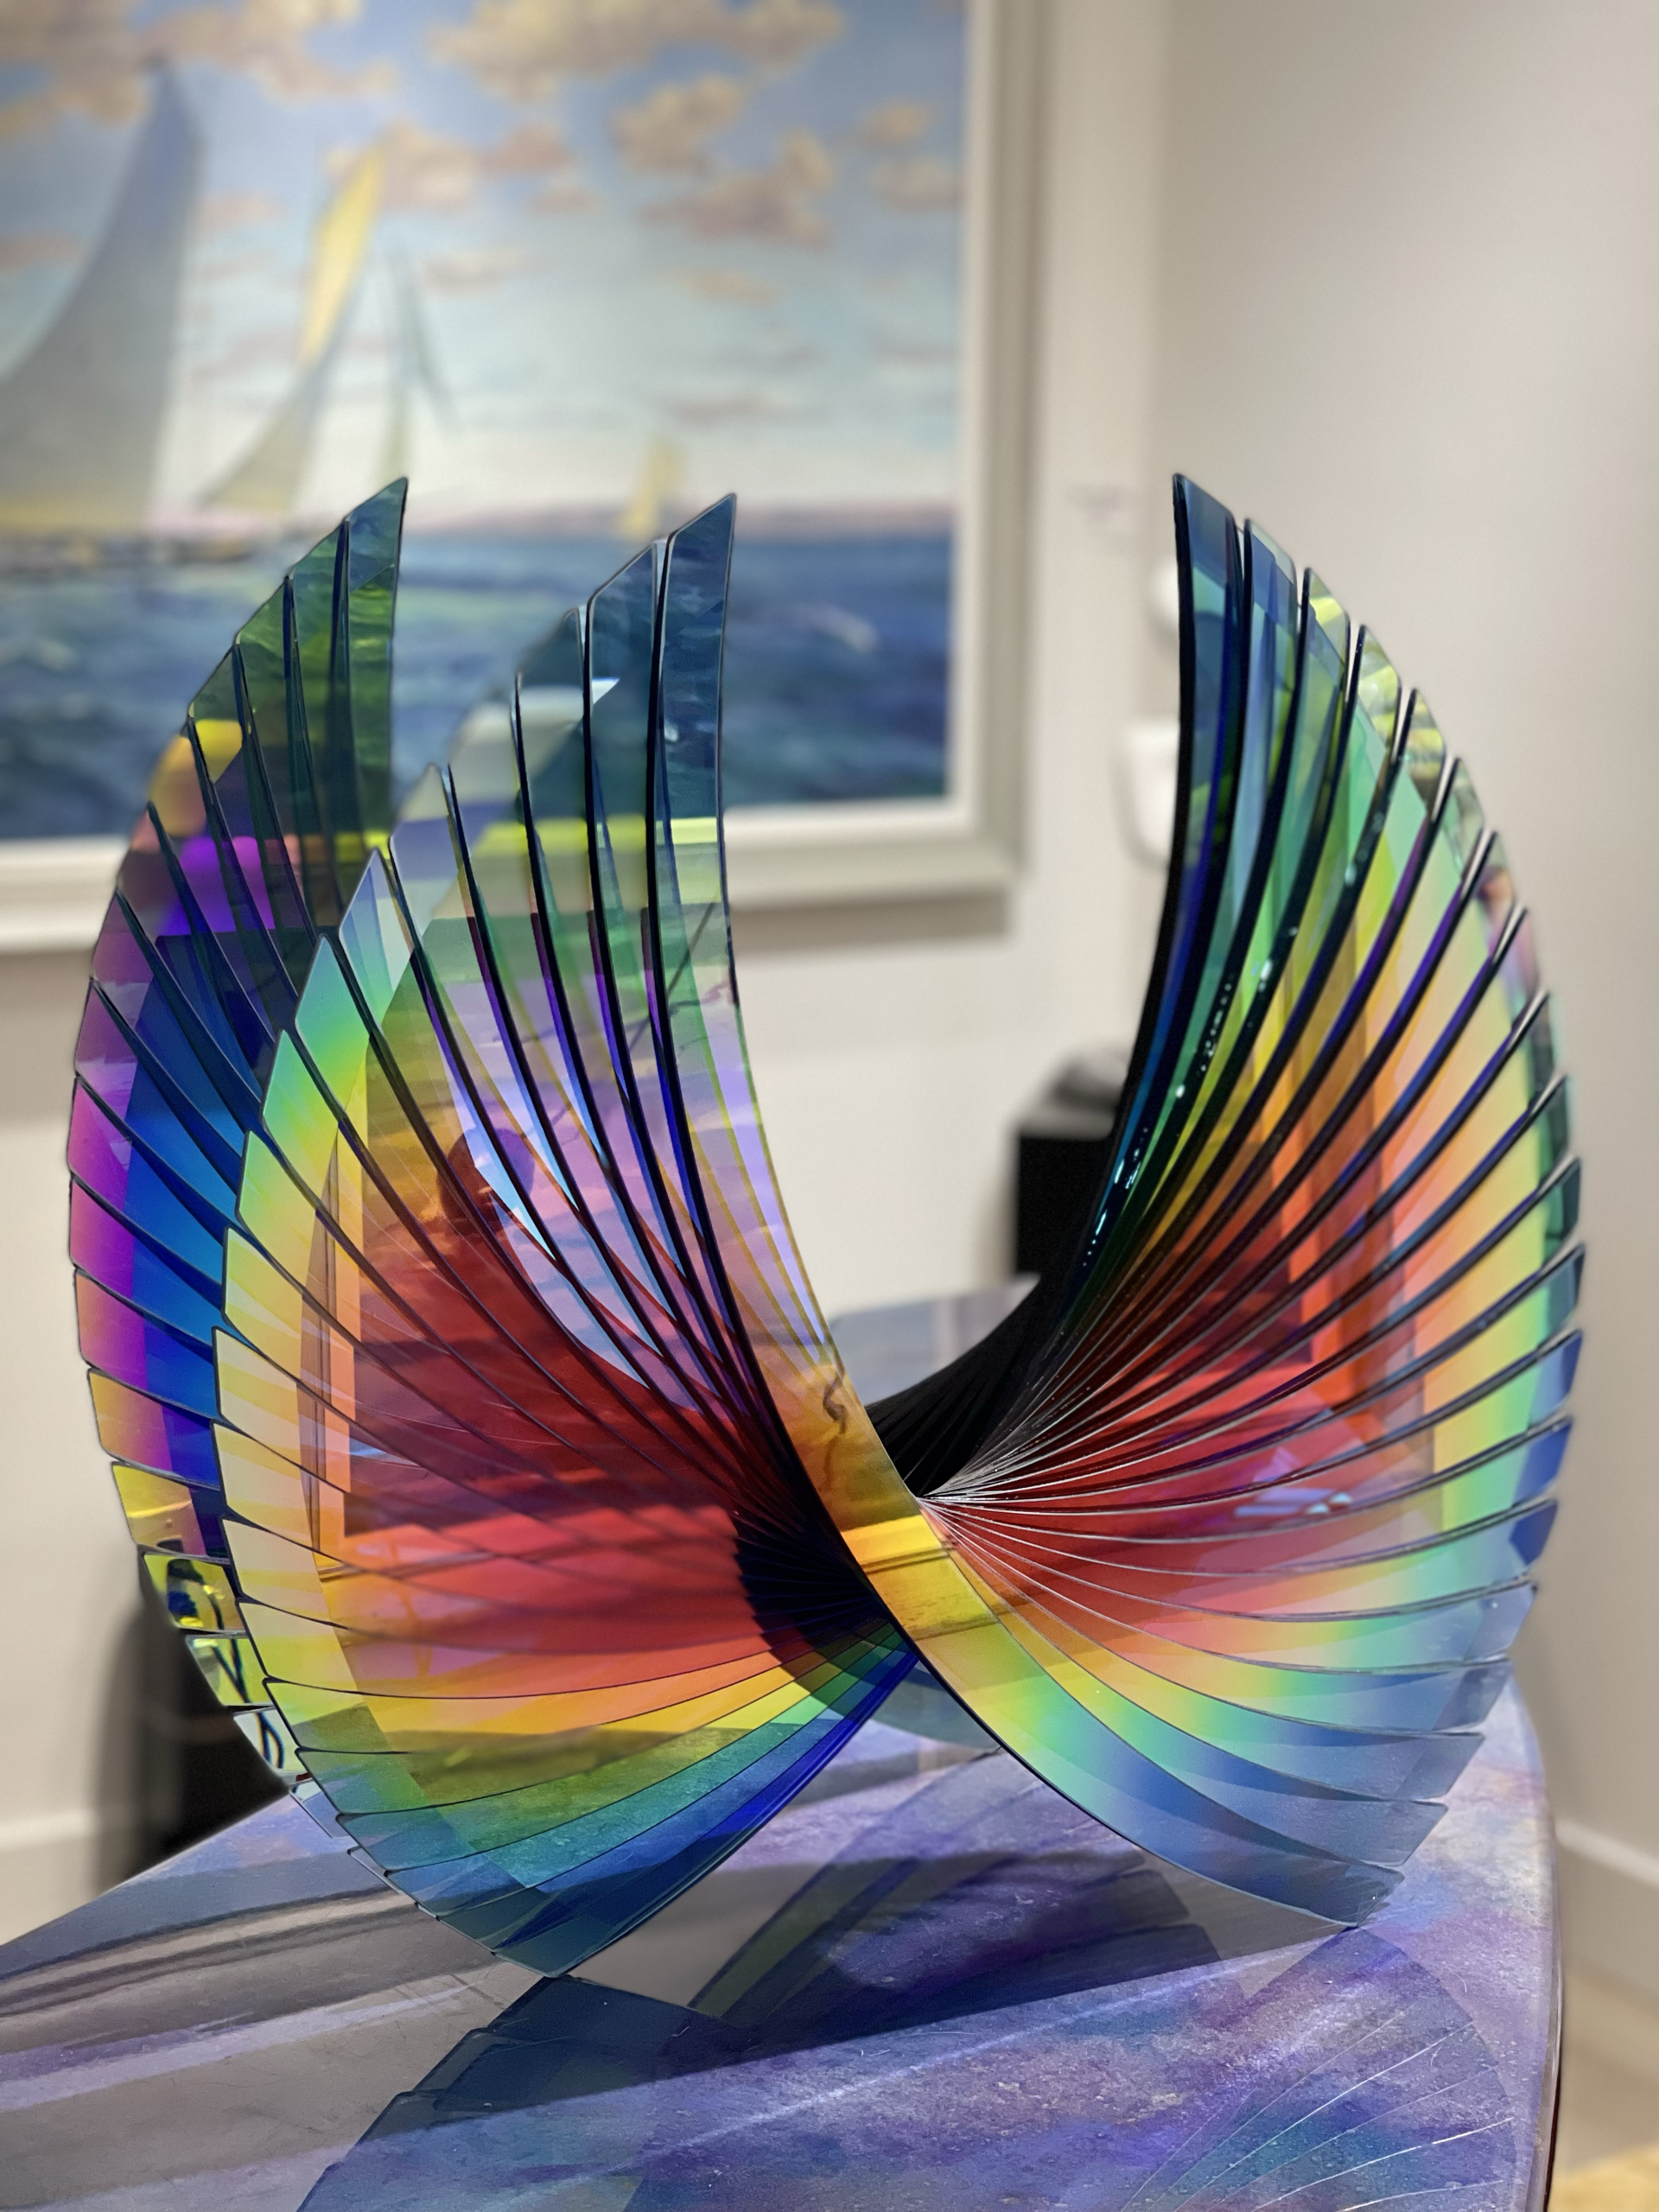 “Wings 24” (Pacifica, Dichroic) by Tom Marosz